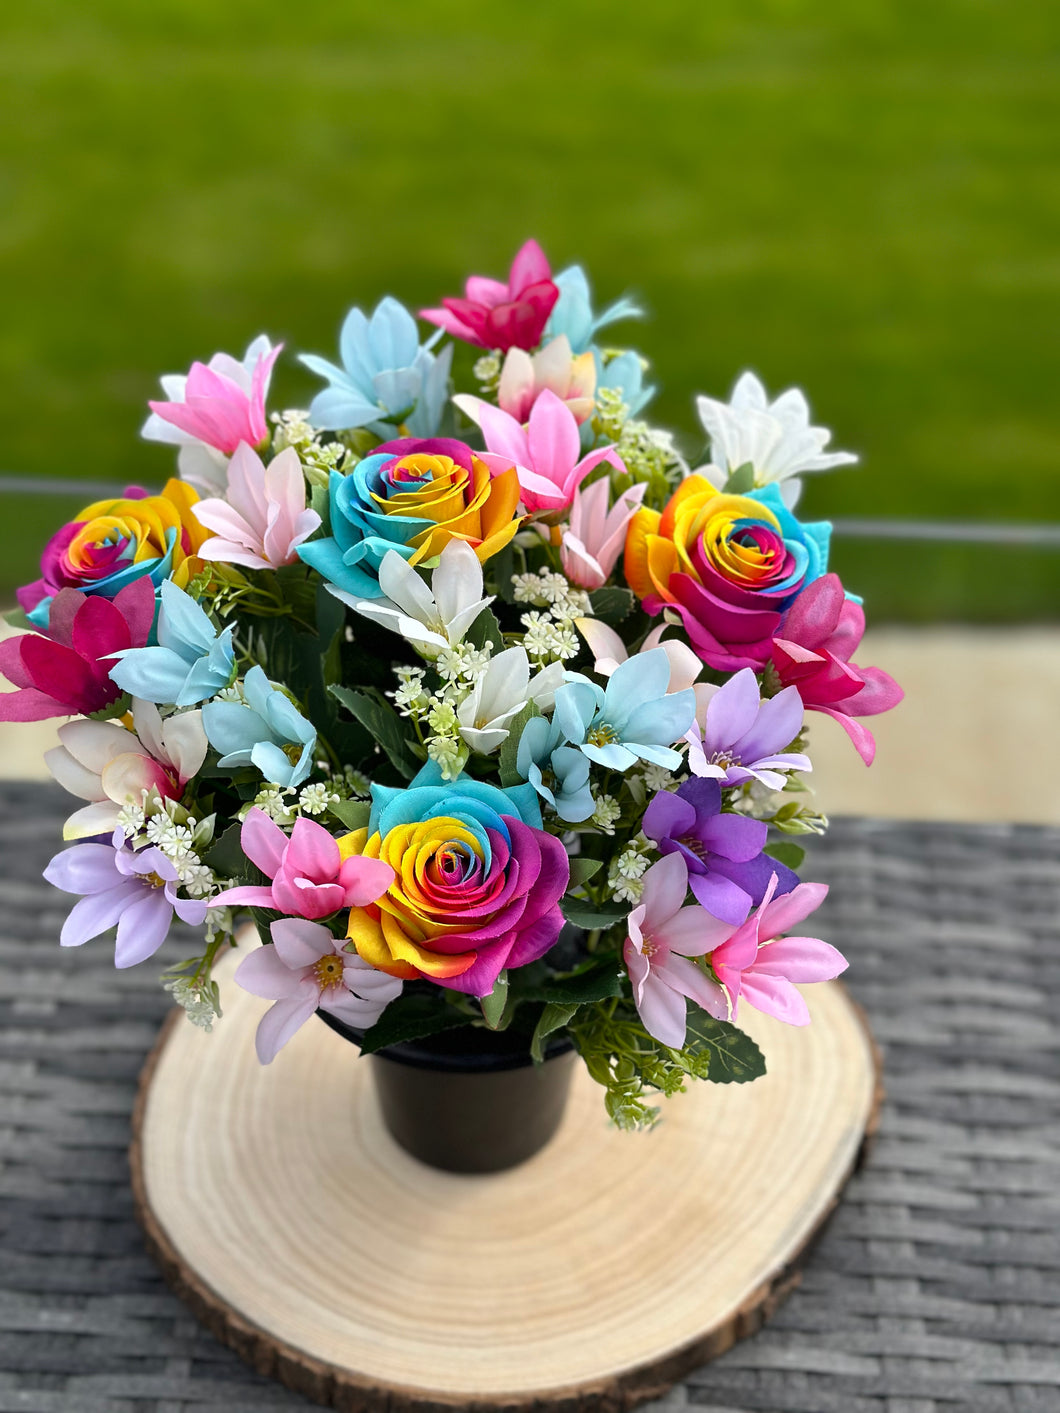 Rainbow Roses, Sunflowers and Memorial Grave Pot with A Mix of Colourful Flowers